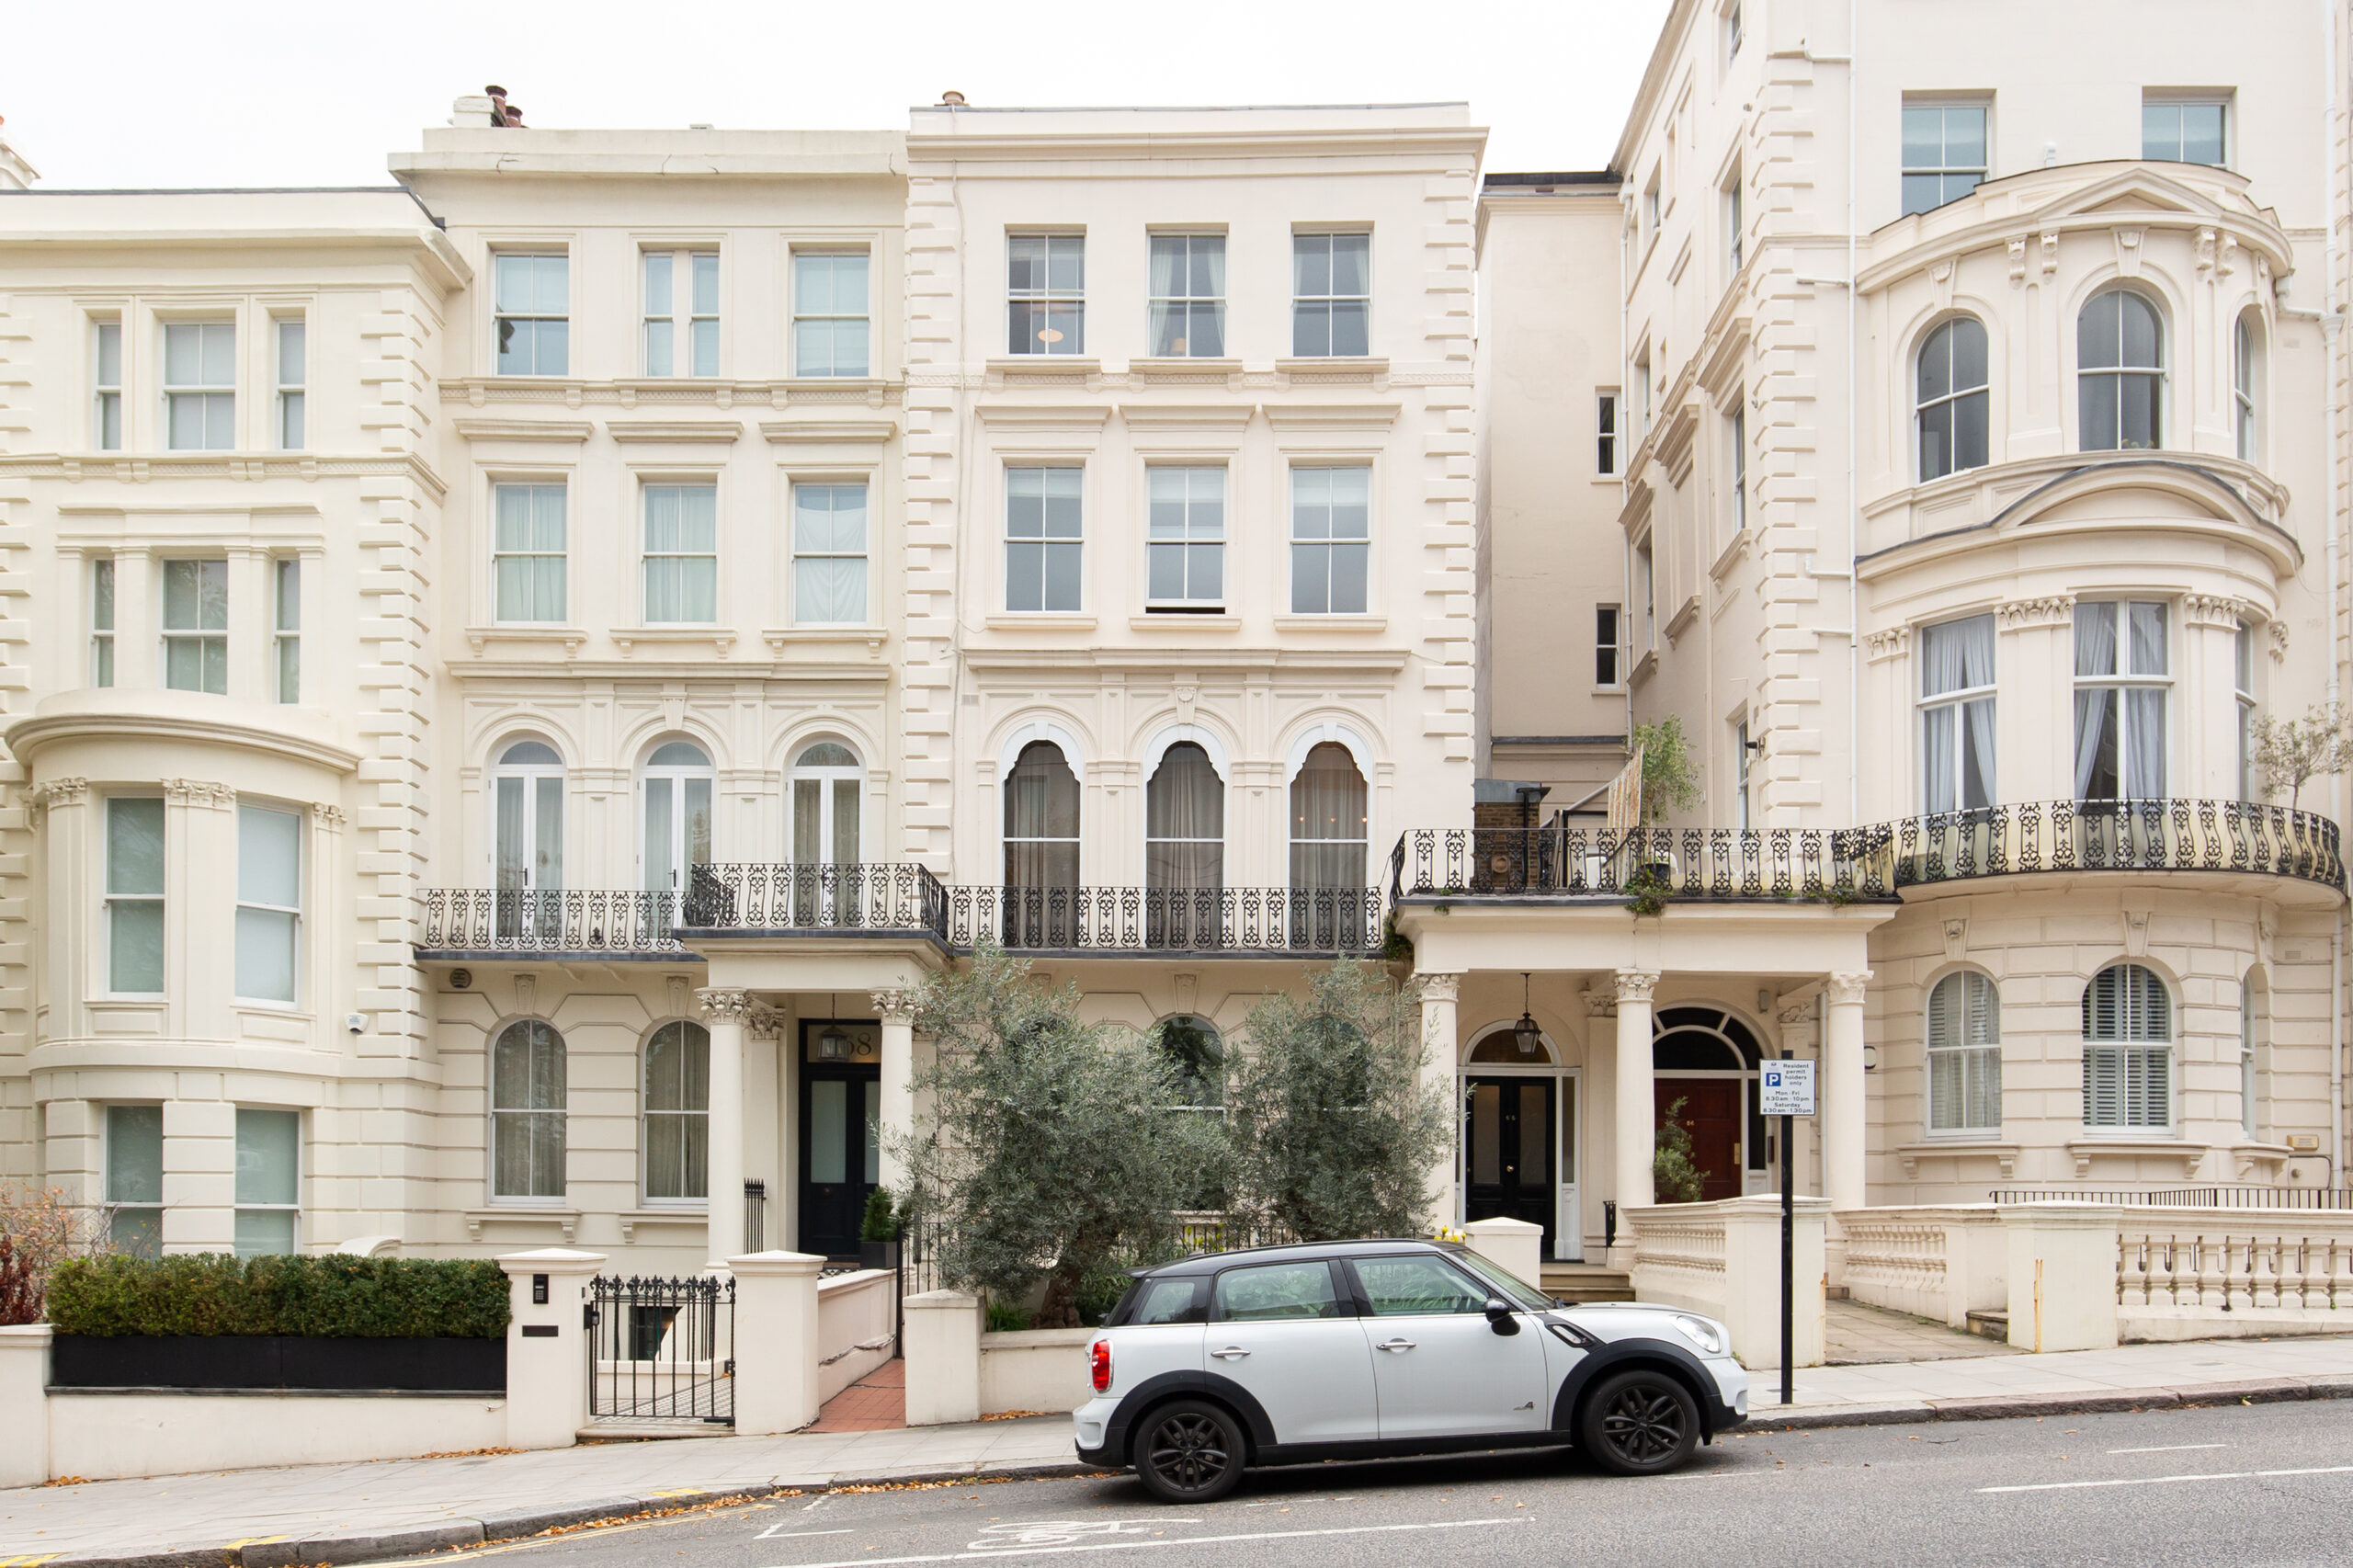 For Sale: Ladbroke Grove Notting Hill W11 exterior façade with stucco frontage